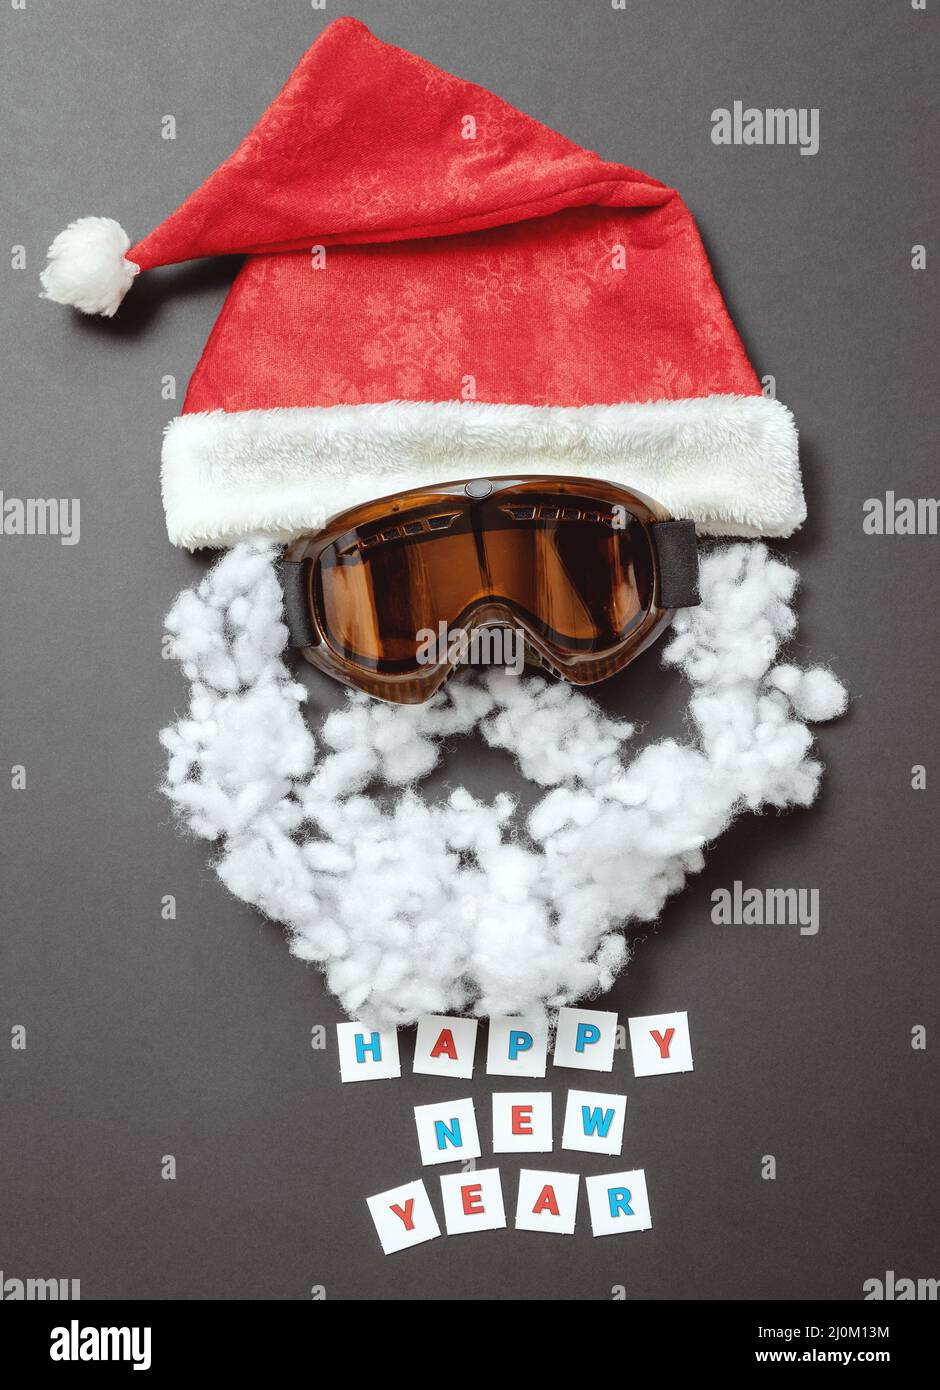 Red velvet hat with snow mask and cotton mustache and beard. Cheerful New Year card Stock Photo